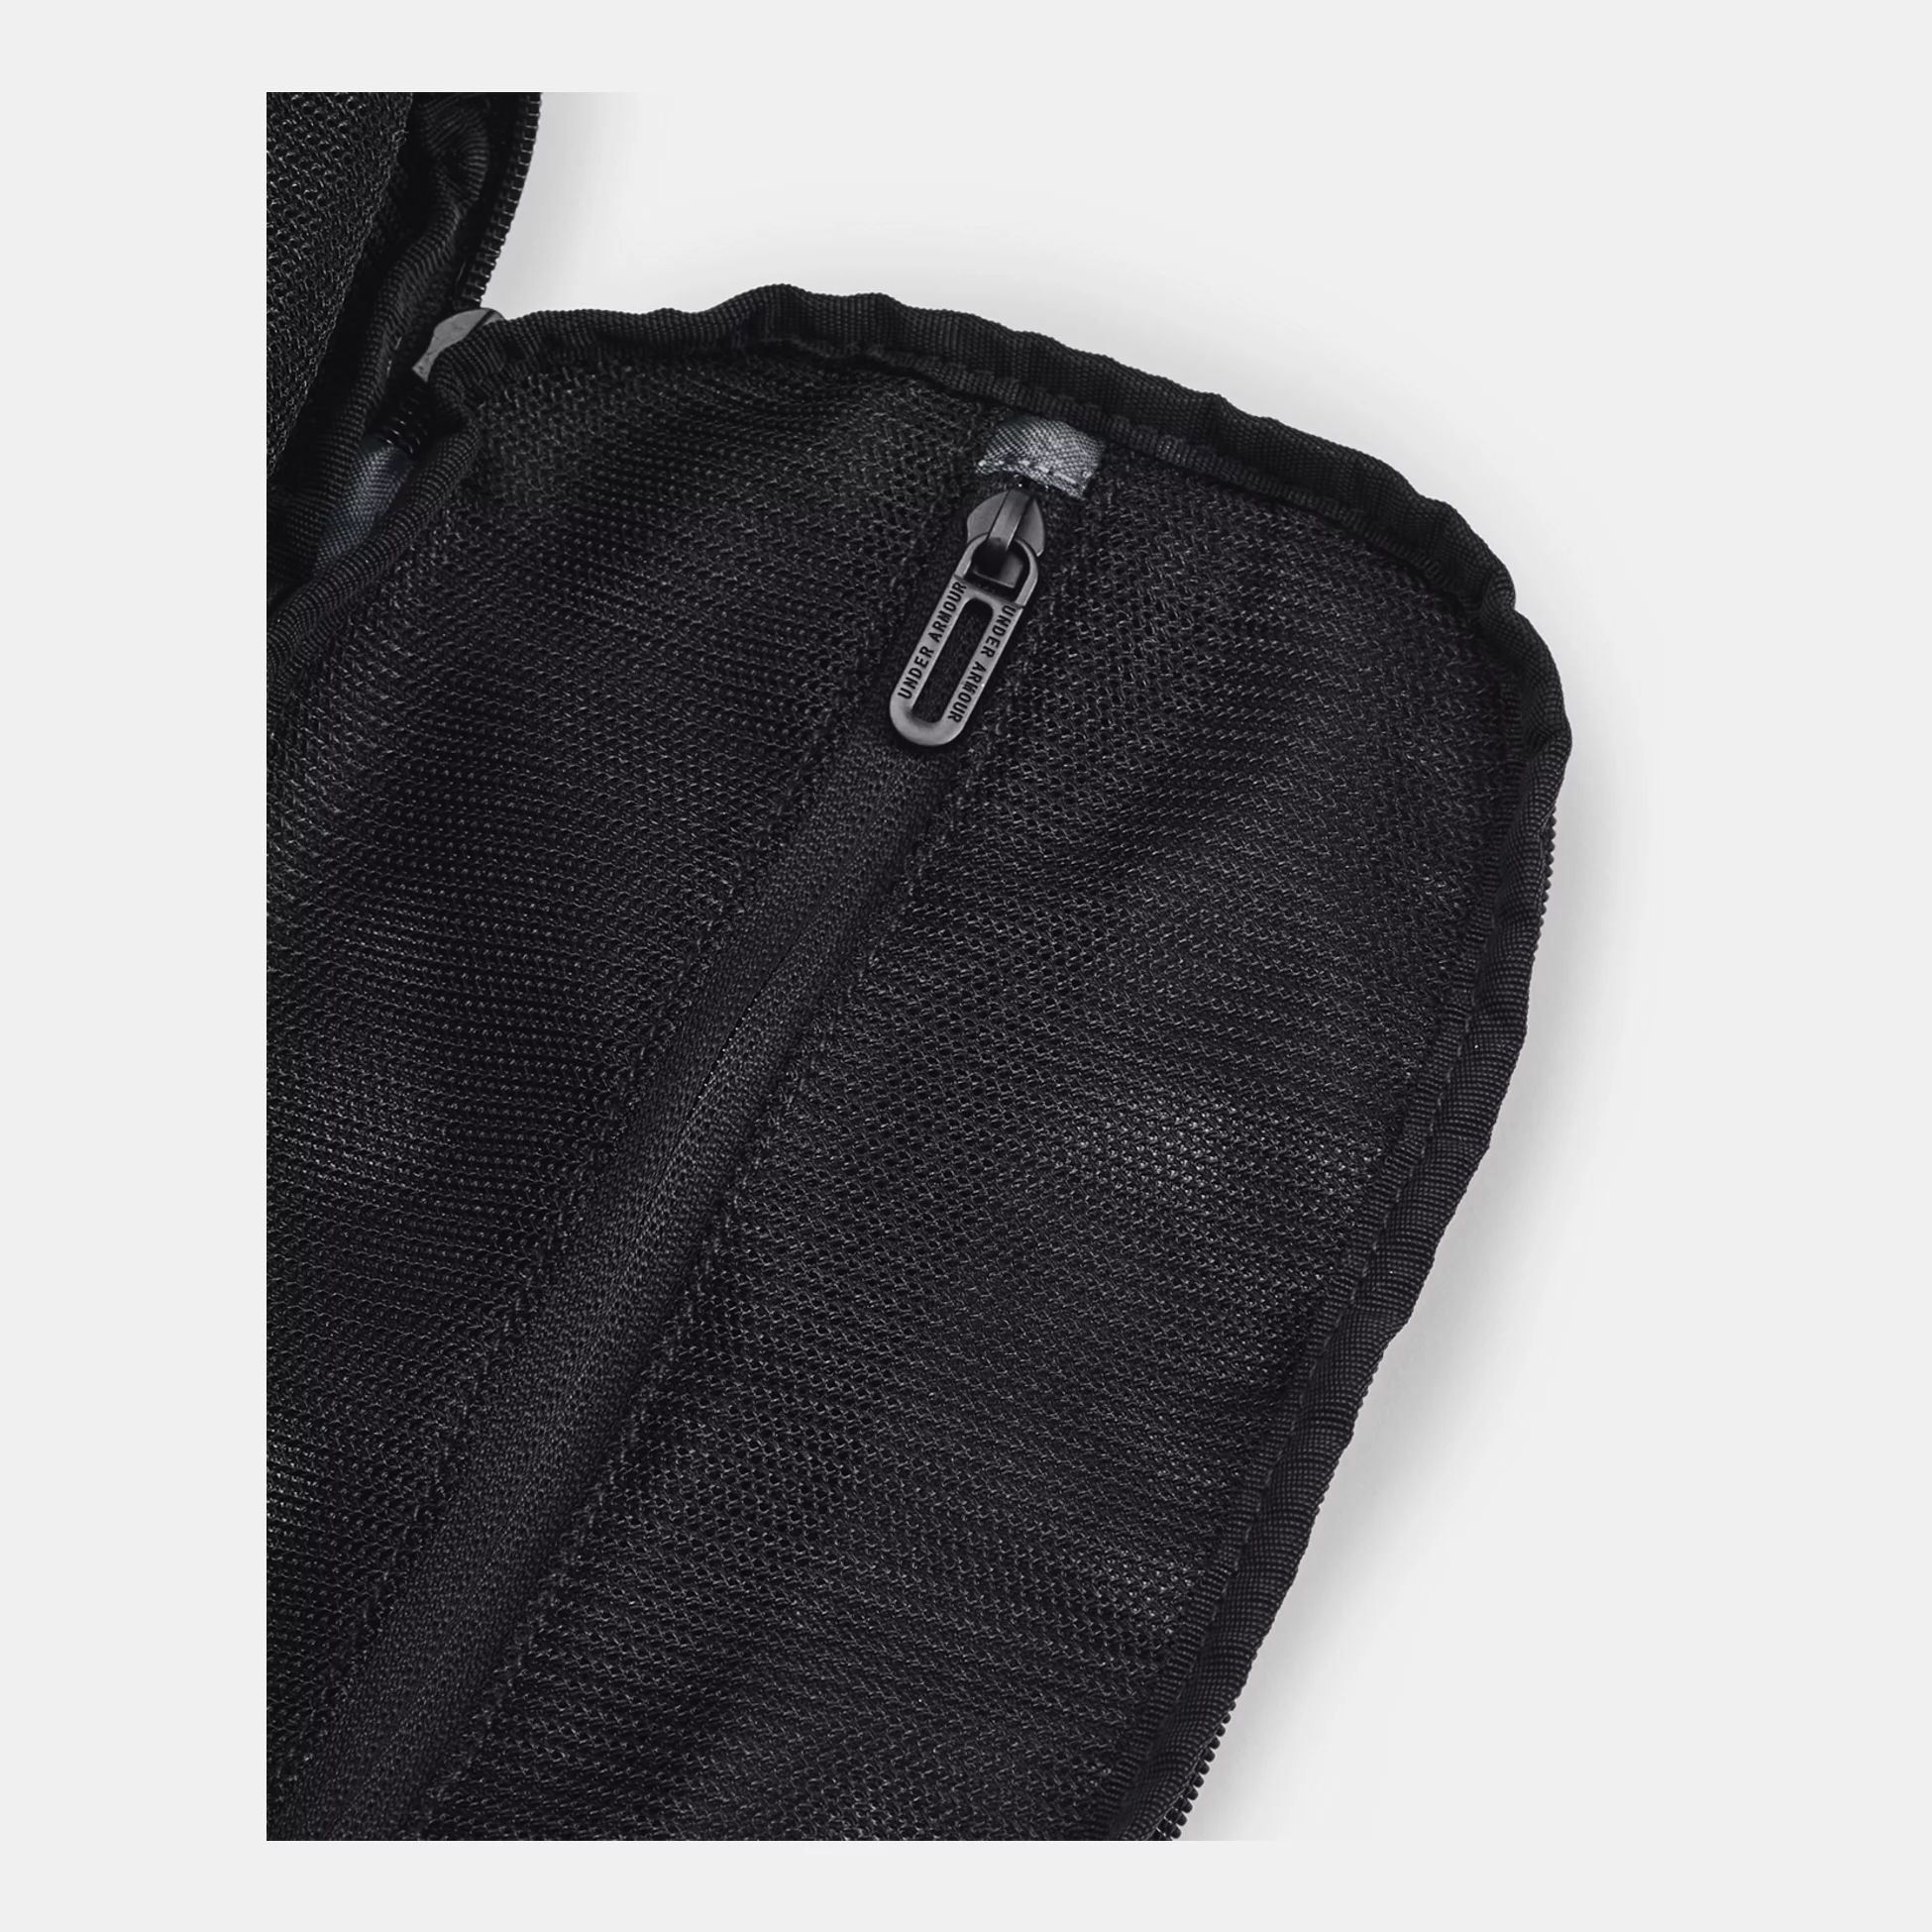 Bags -  under armour UA Contain Travel Kit